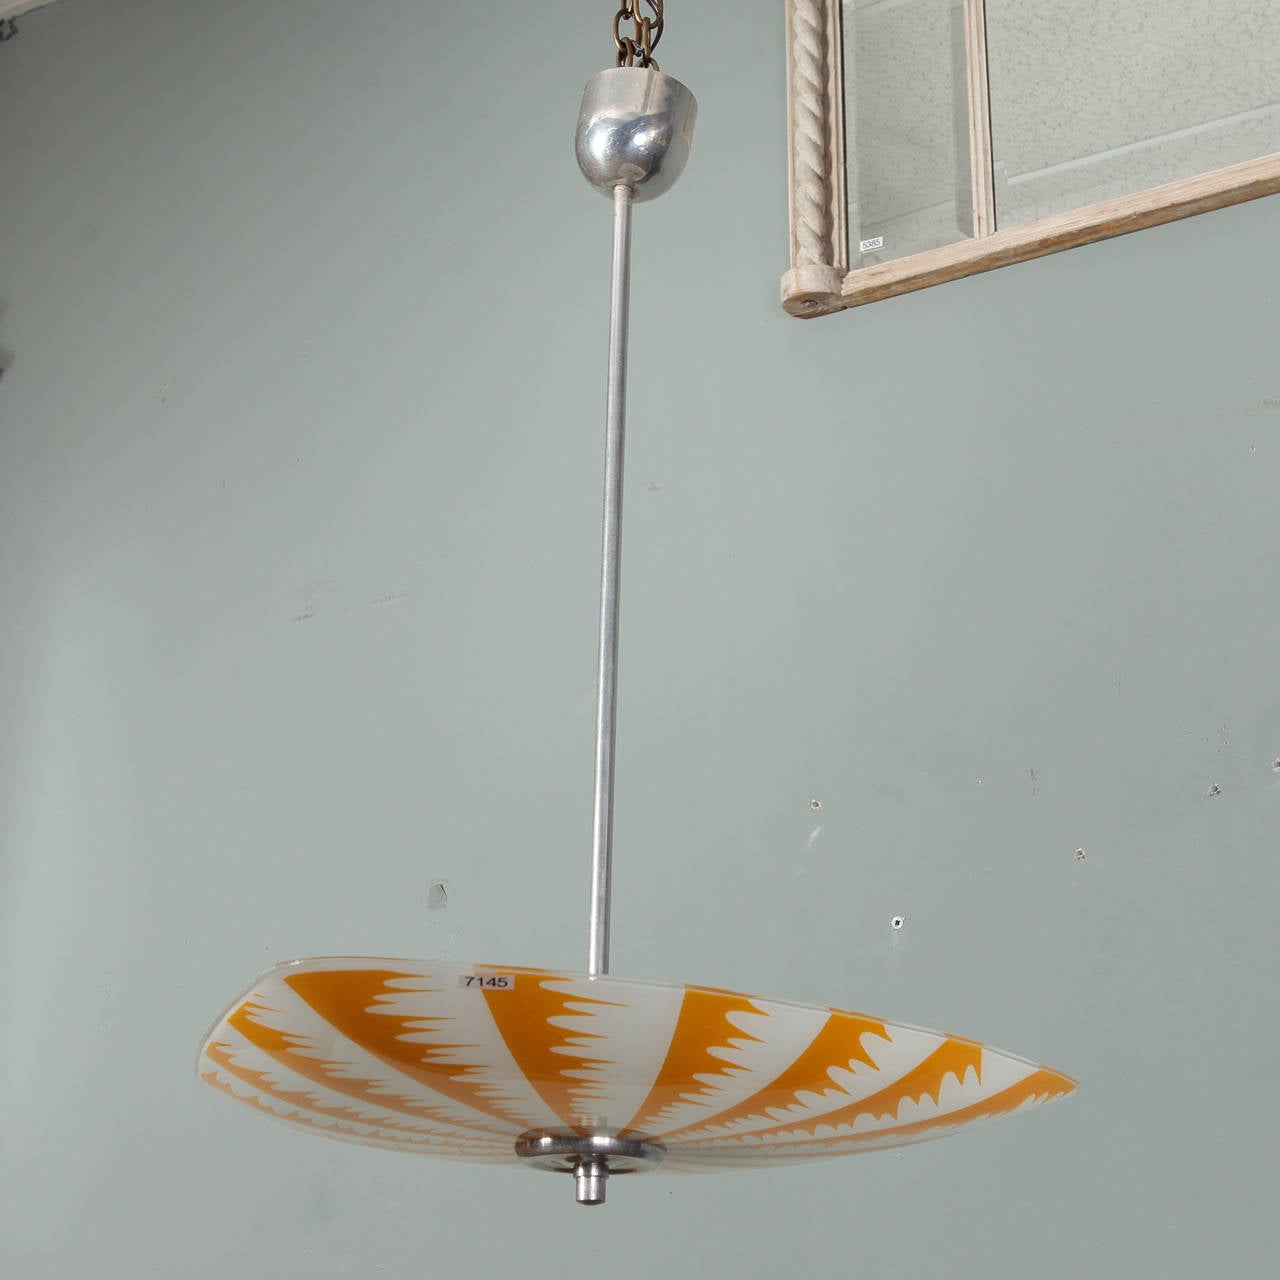 Circa late 1970s / early 1980s European Op Art ceiling fixture (we believe this is German) with bold, graphic pattern in opaque white and sunflower yellow / orange glass with metal hardware. New wiring for US electrical standards.